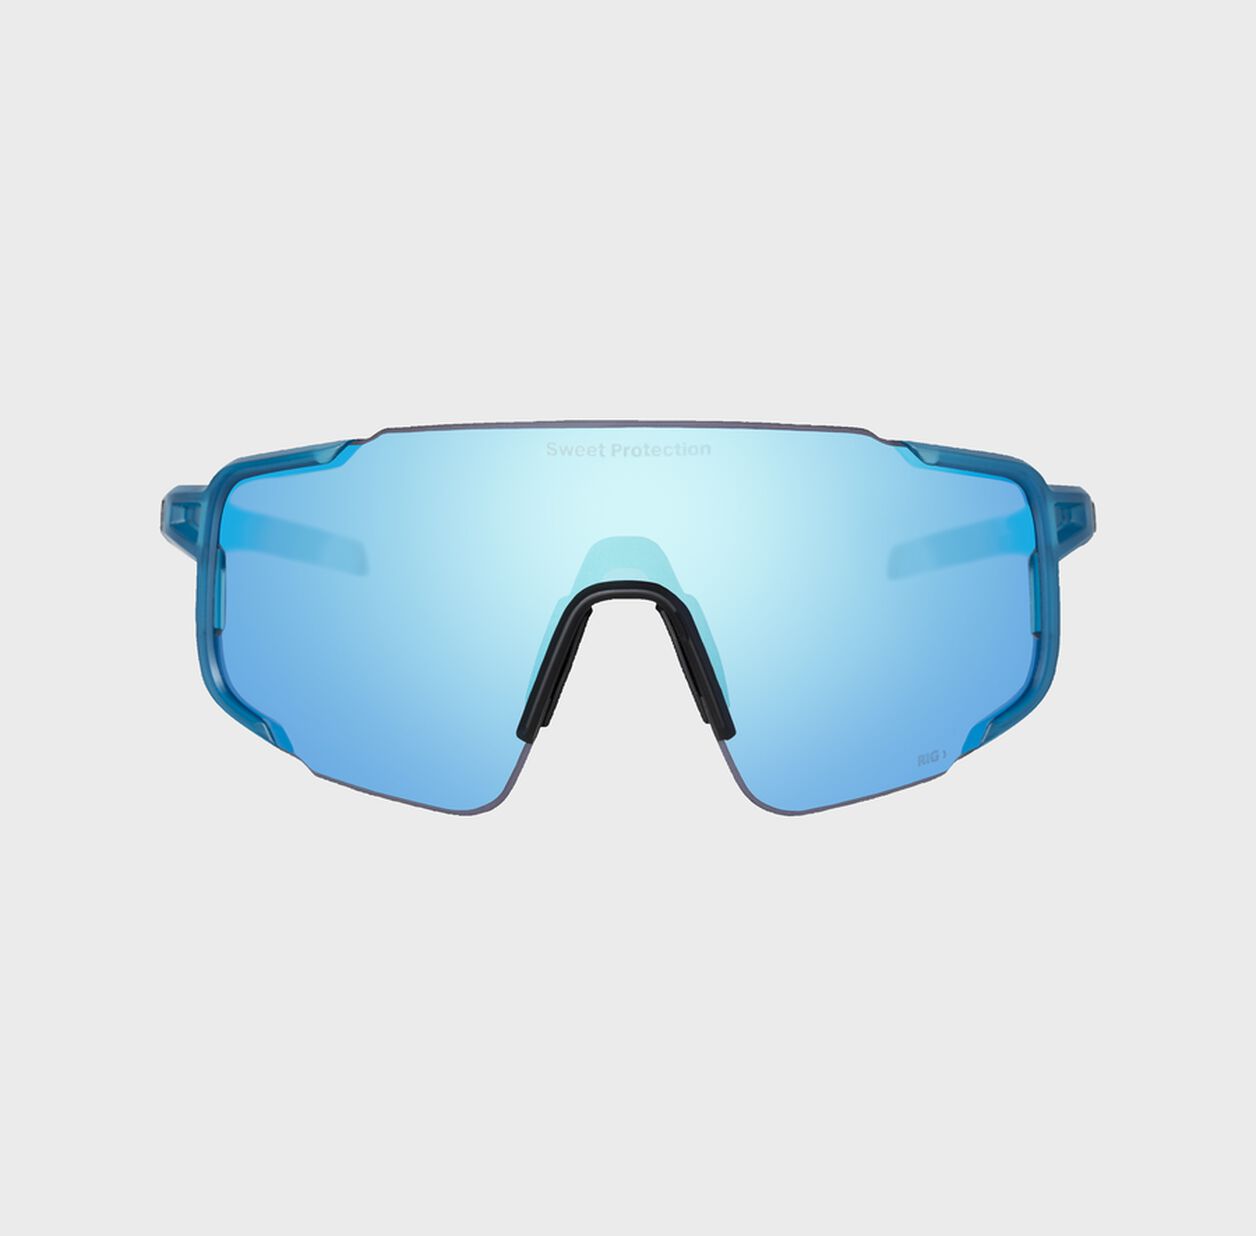 Sweet Protection - Lunettes Ronin Max RIG Reflect Matte Crystal Aqua Lunettes Sweet Protection 